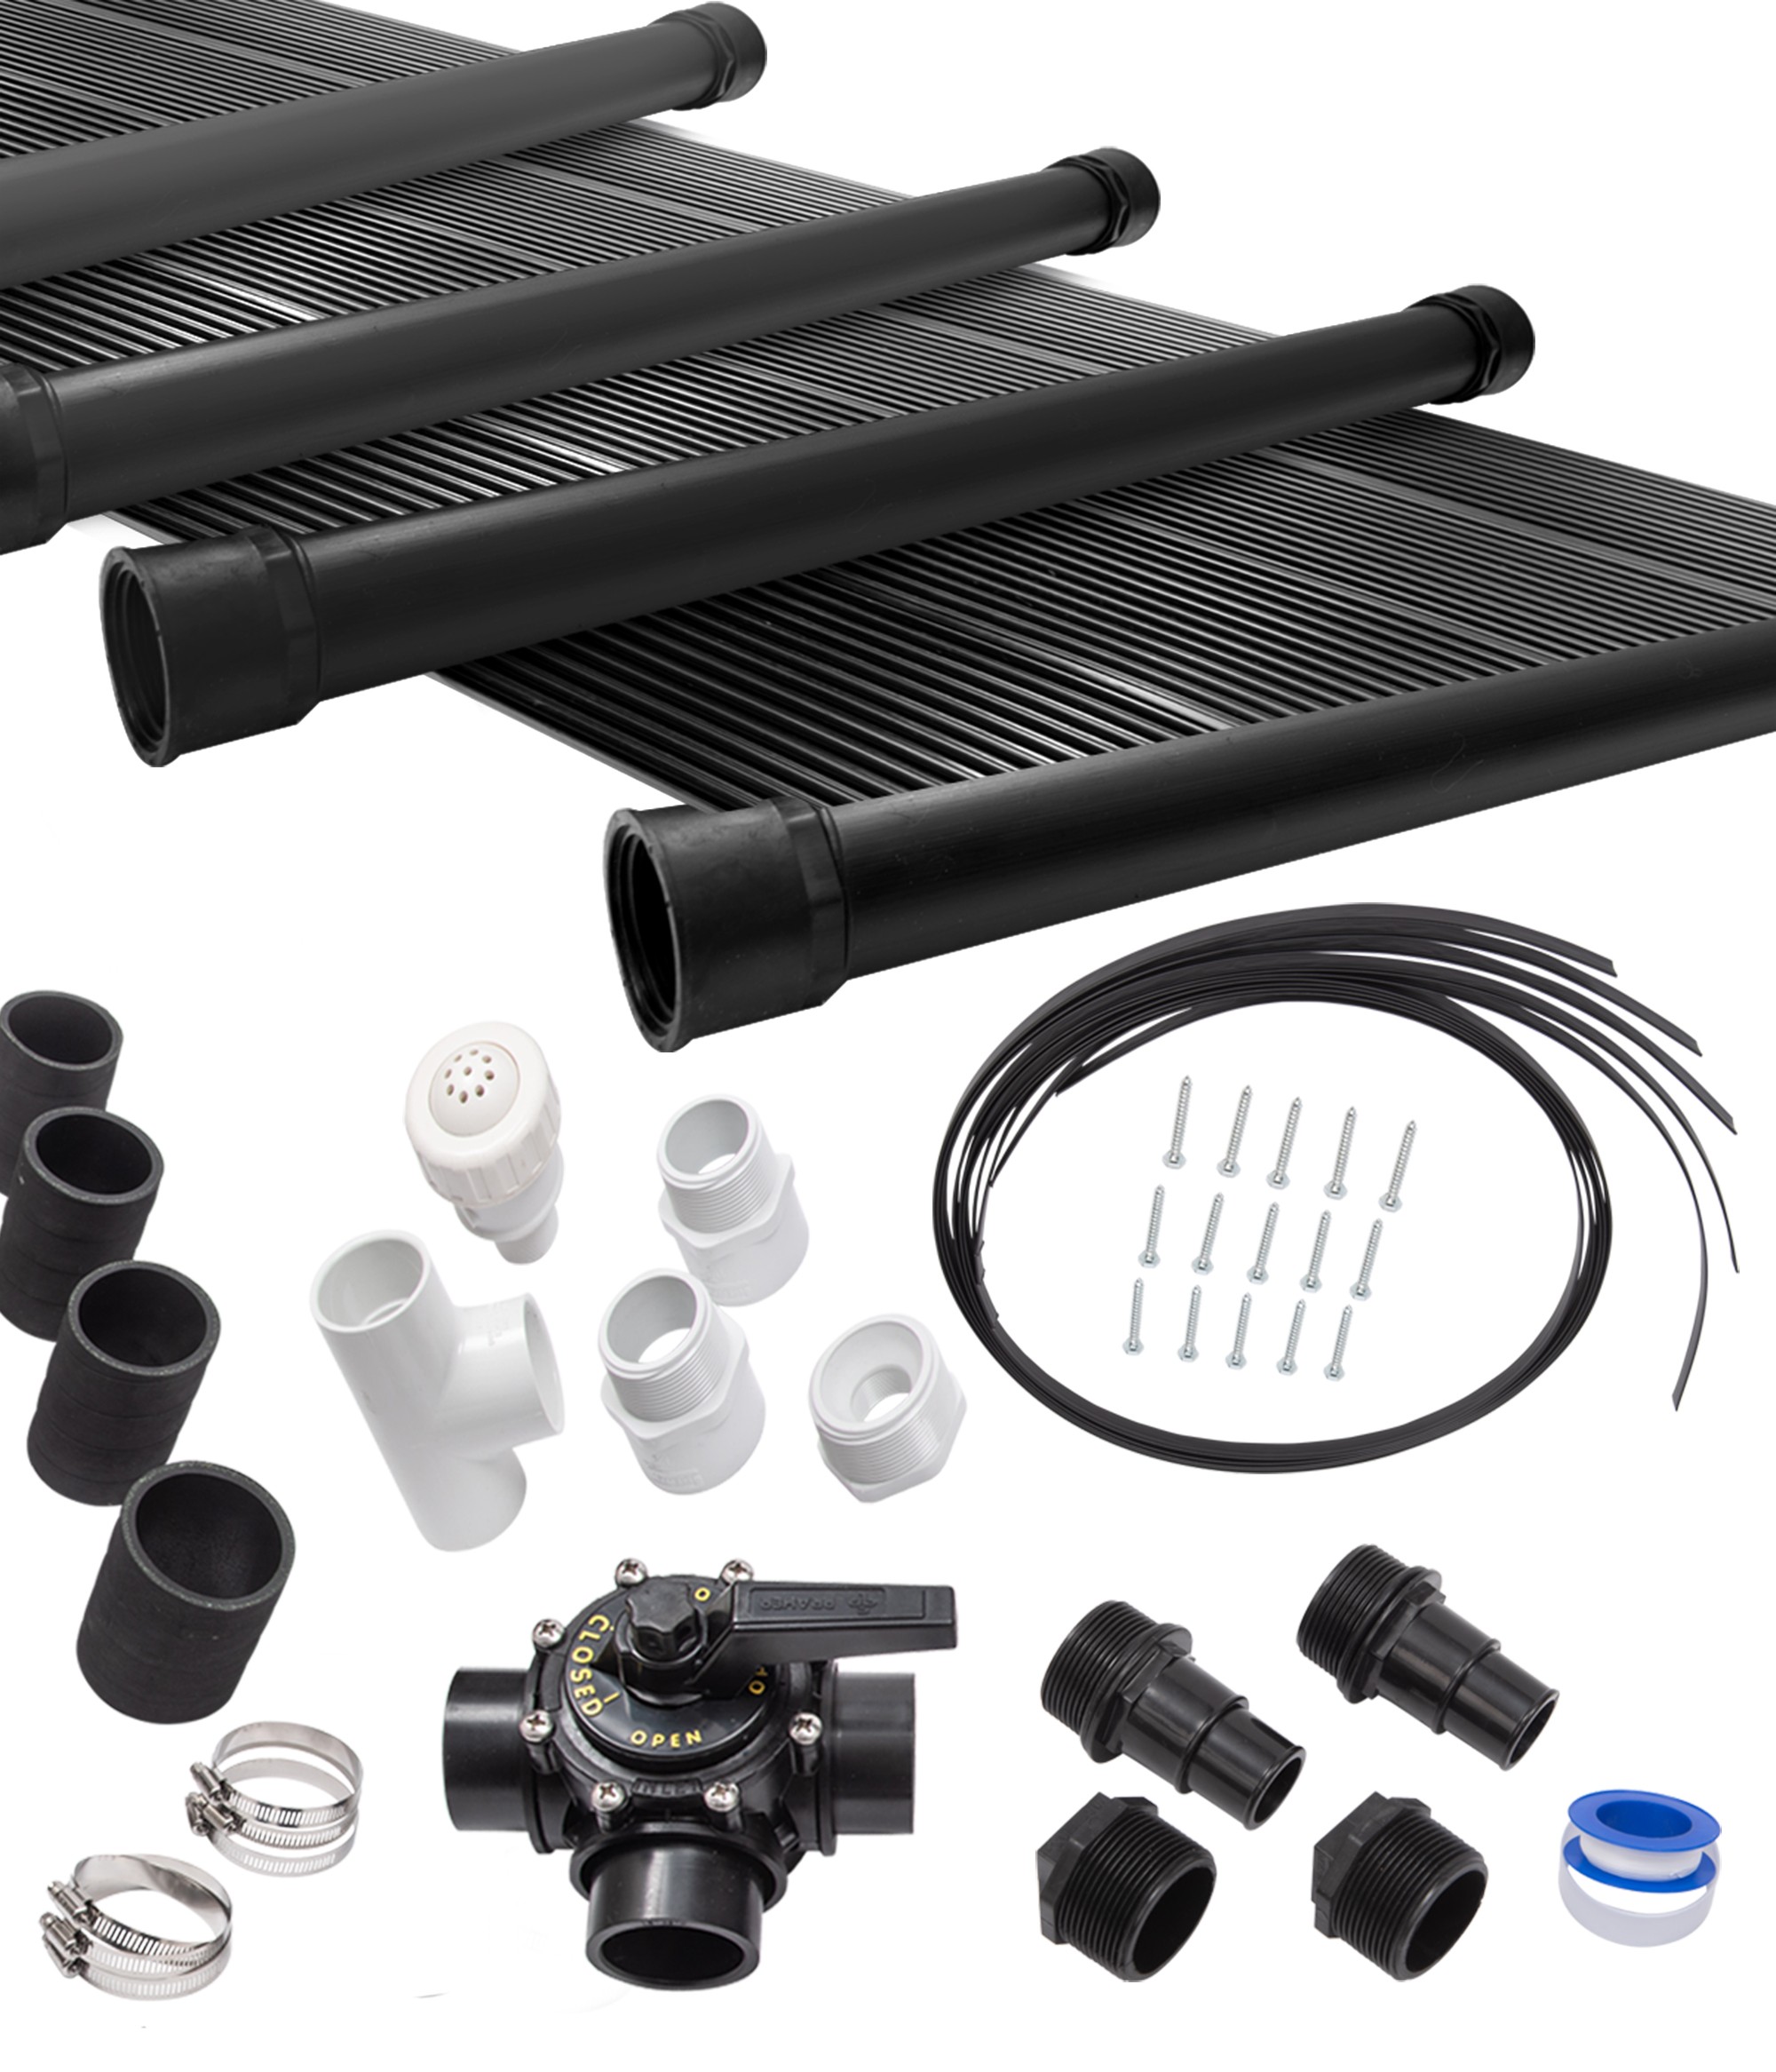 4-2X12' SunQuest Solar Swimming Pool Heater Complete System with Roof Kits